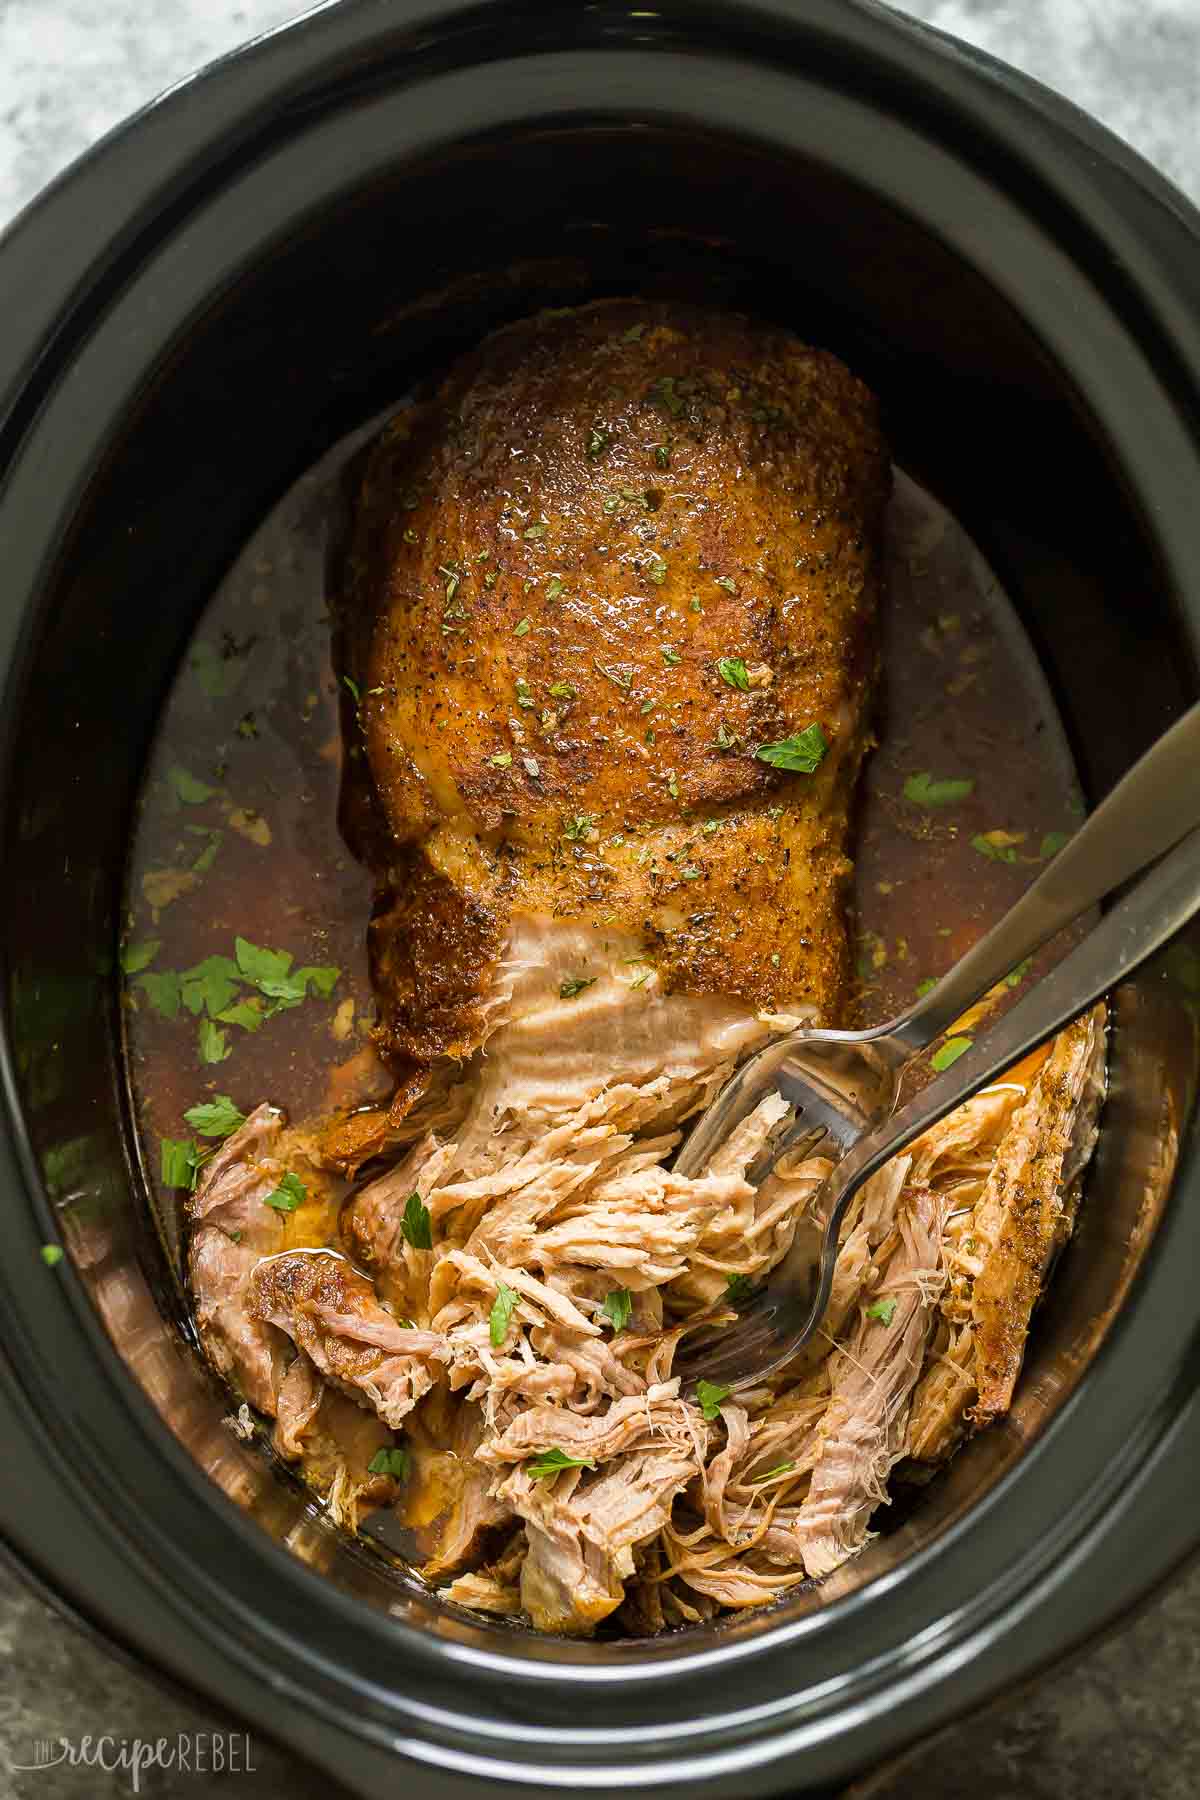 Reheating in a slow cooker 